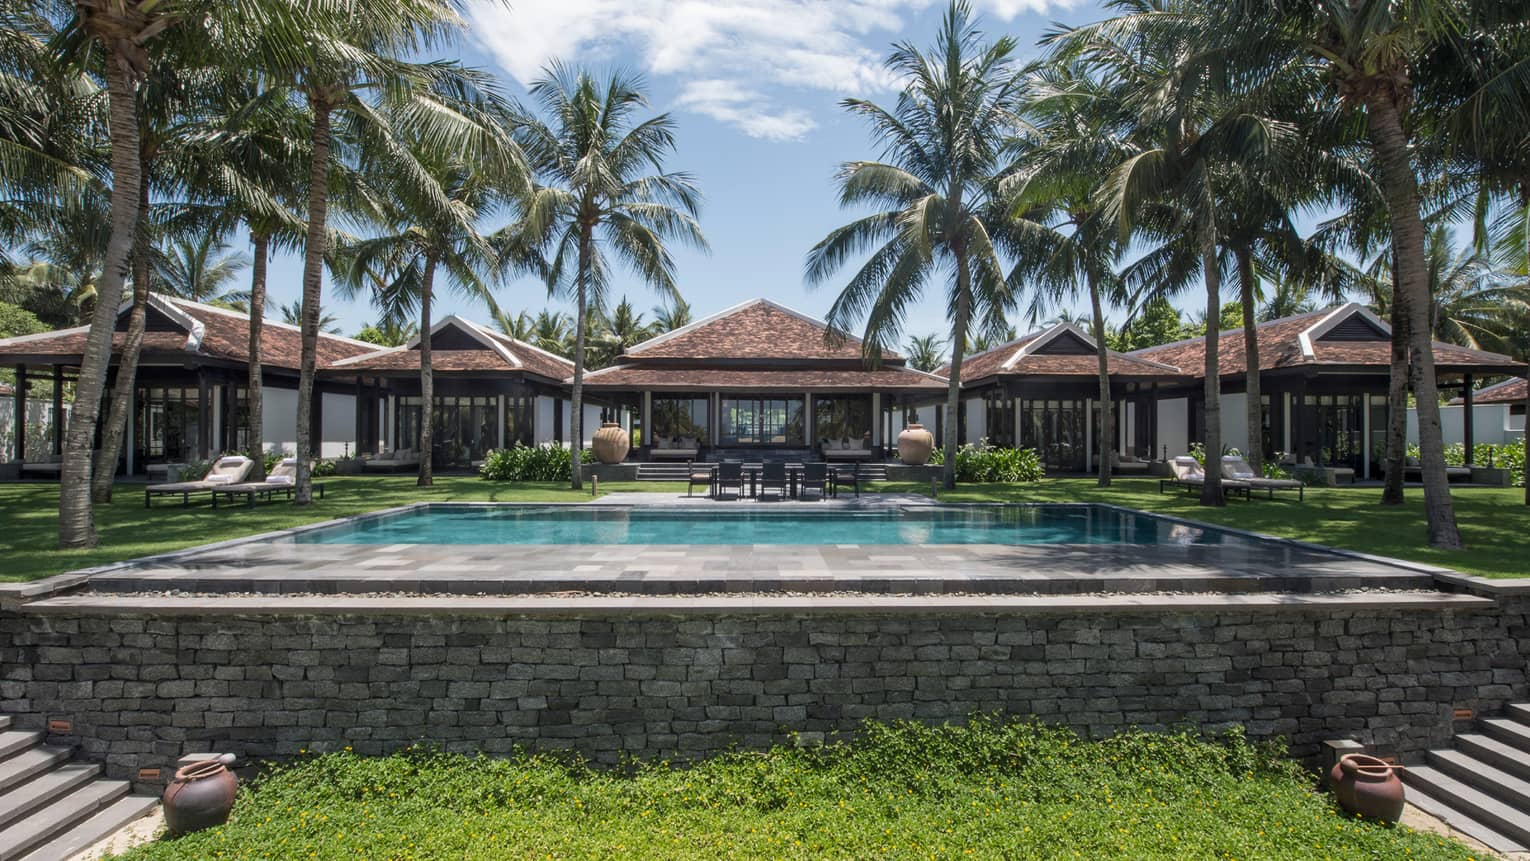 Ocean-View Villas behind large stone outdoor swimming pool, tall palm trees